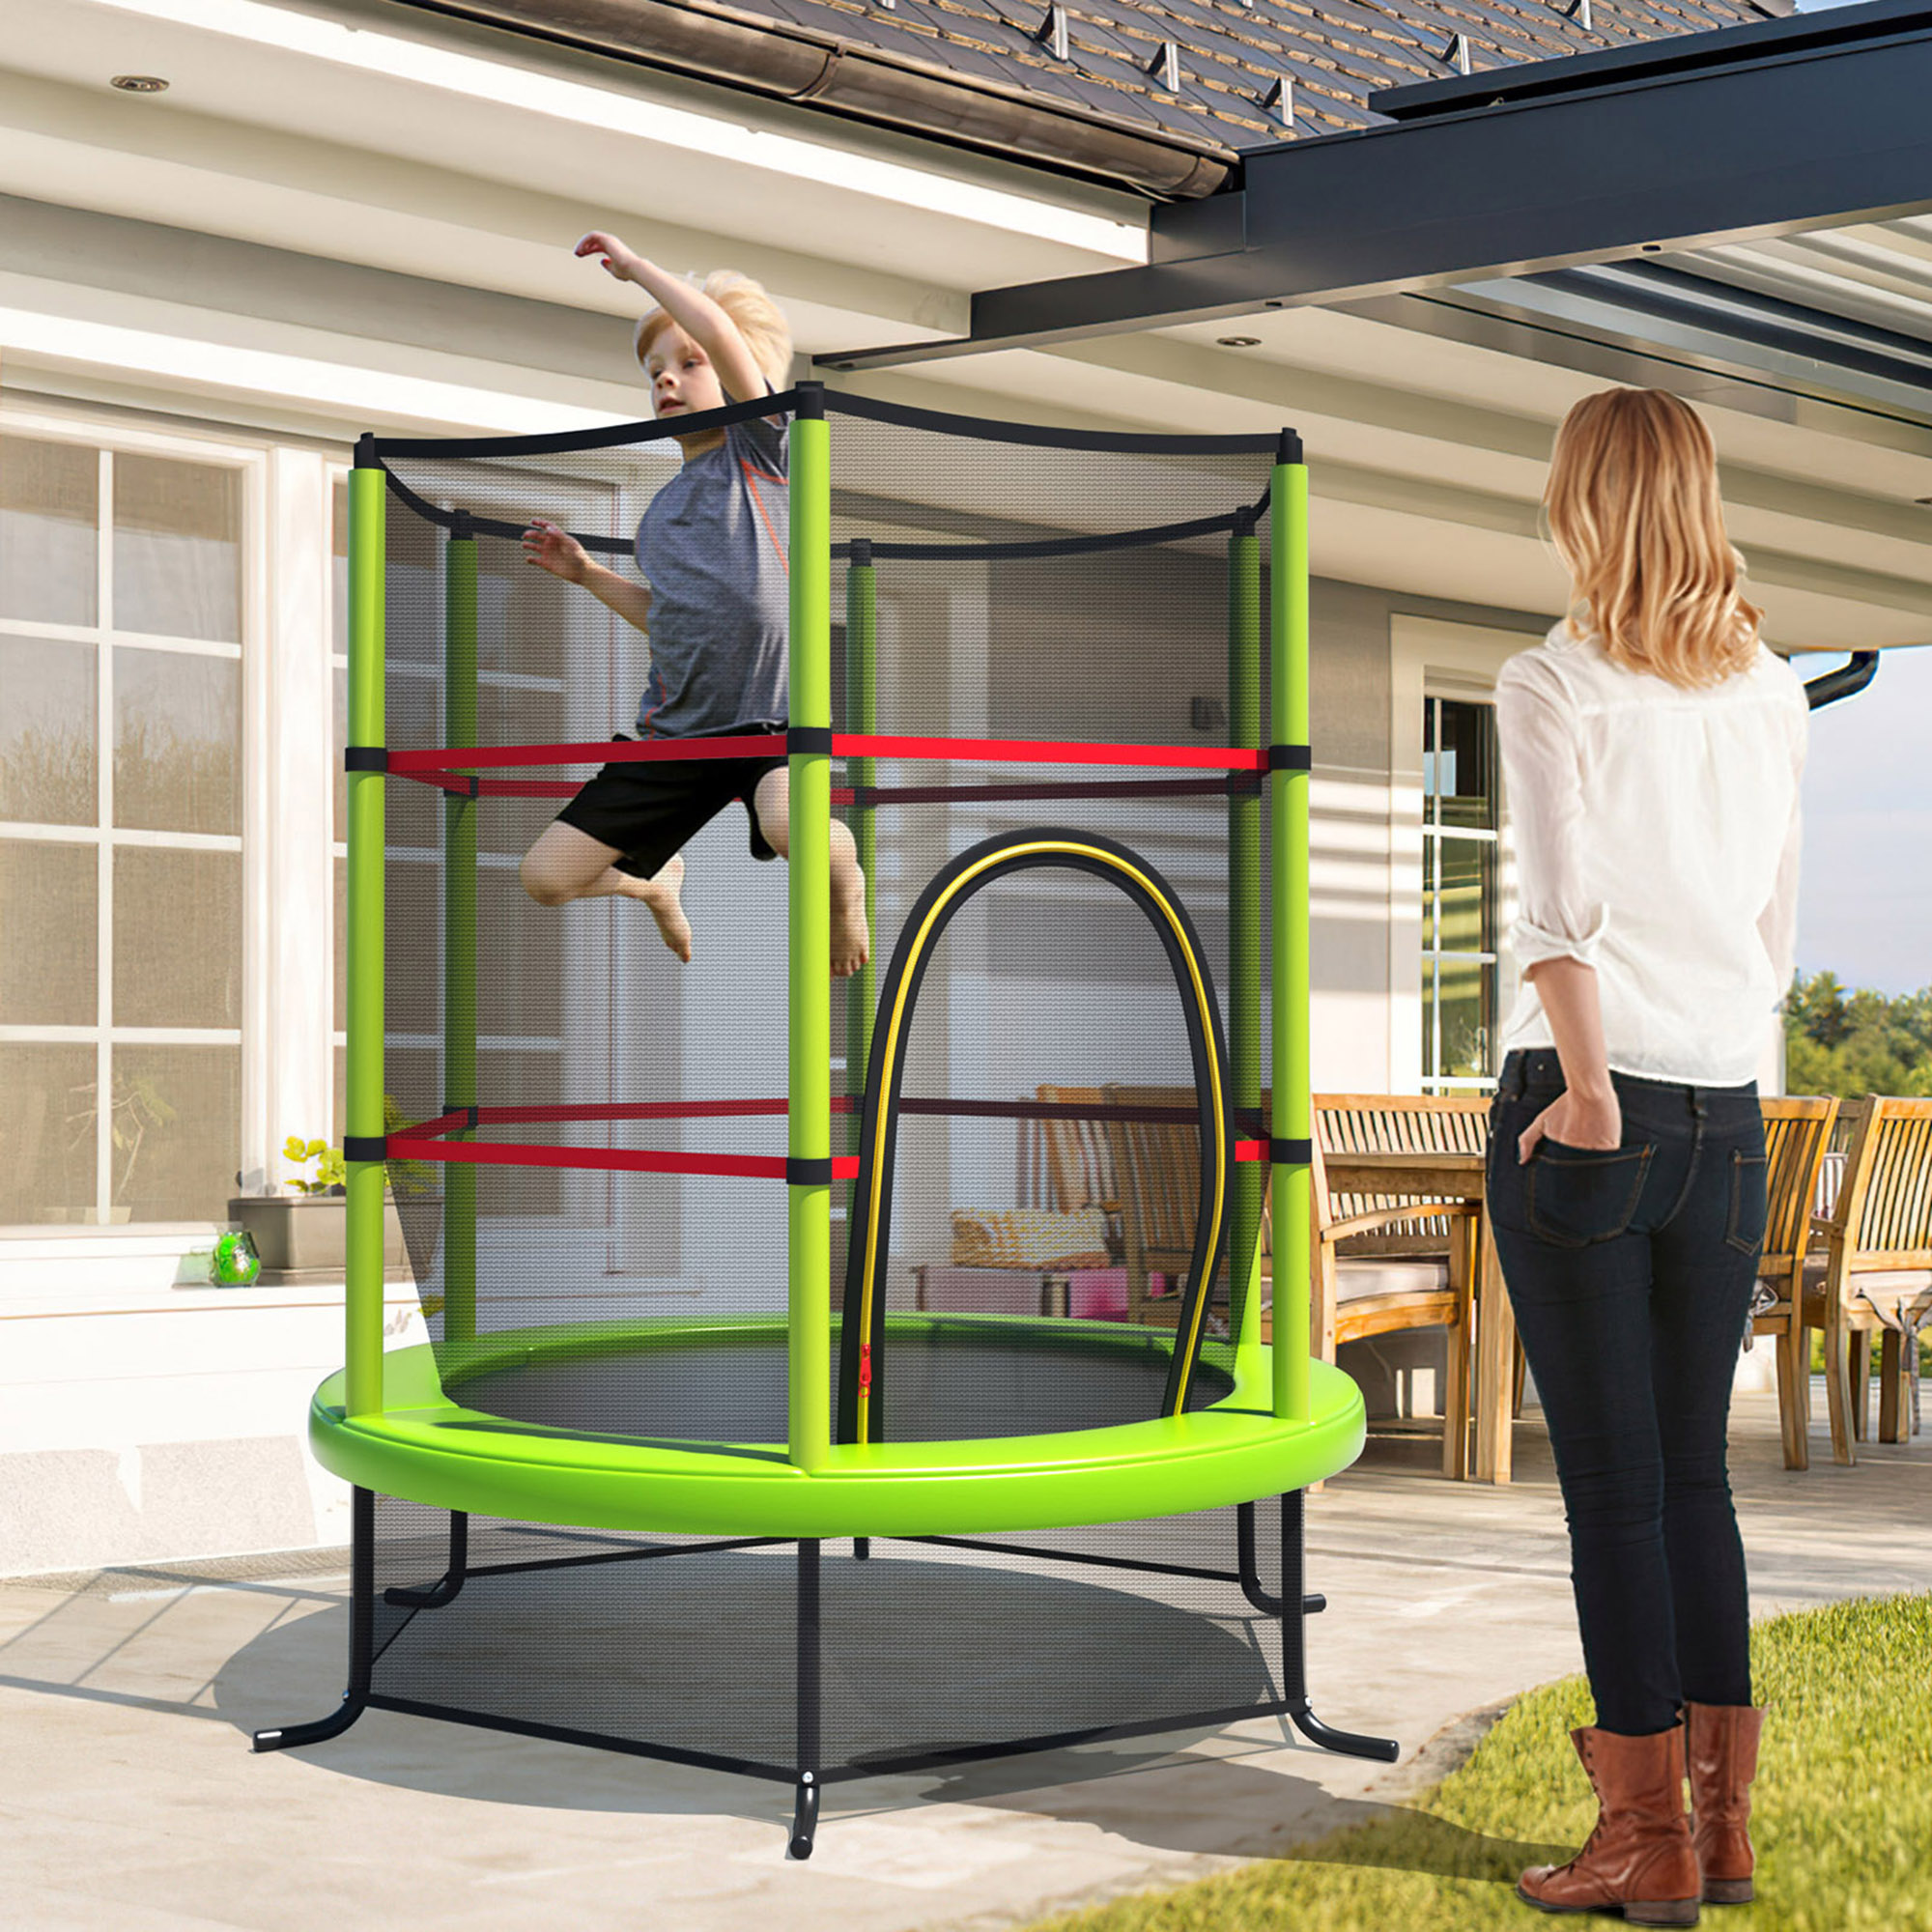 Gymax 55'' Recreational Trampoline for Kids Toddler Trampoline w/ Enclosure Net Green - image 5 of 10